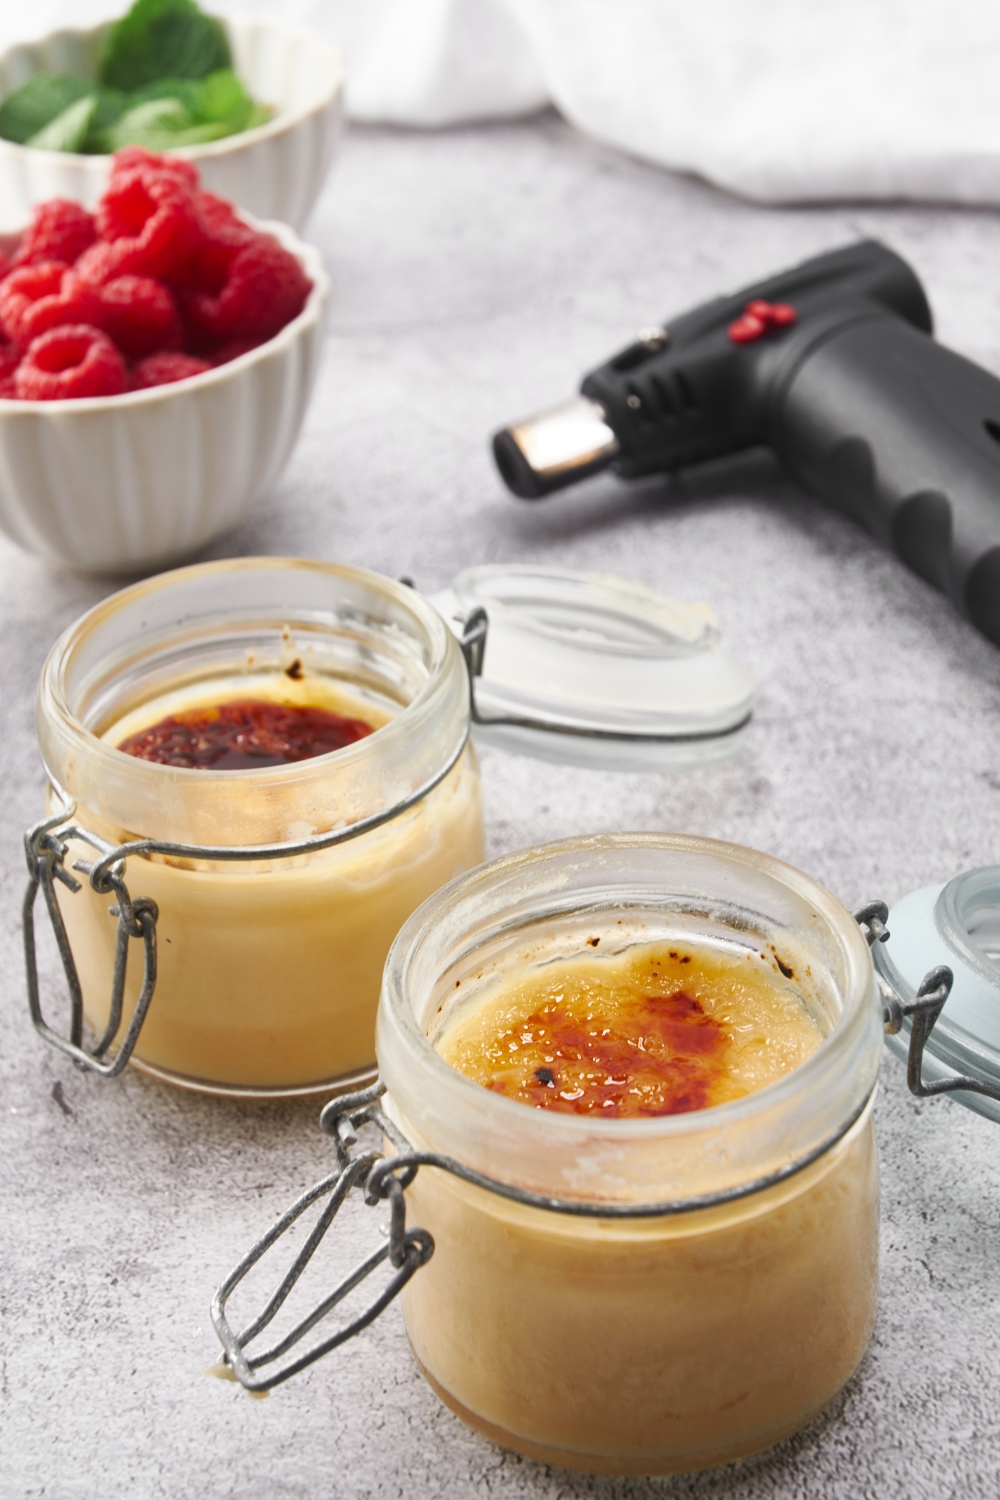 Two creme brûlée desserts in jars with a kitchen torch and a bowl of raspberries in the background.